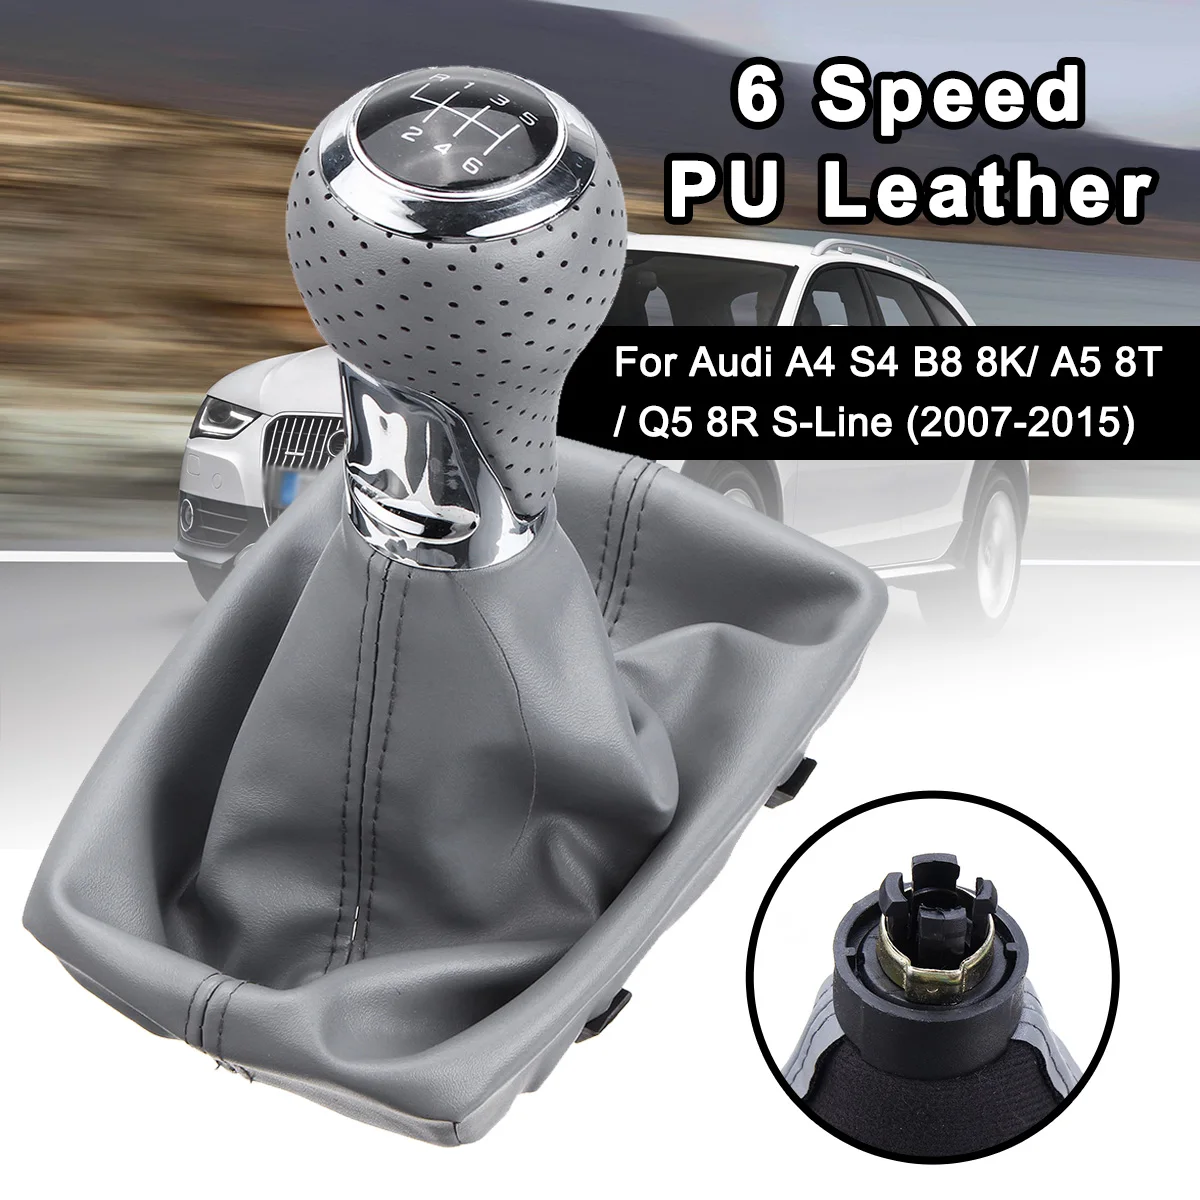 

6 Speed Boot Cover Gaiter Lever Shifter PU Leather Car Manual Gear Shift Knob For Audi A4 S4 B8 8K/ A5 8T/ Q5 8R 07-15 S-Line